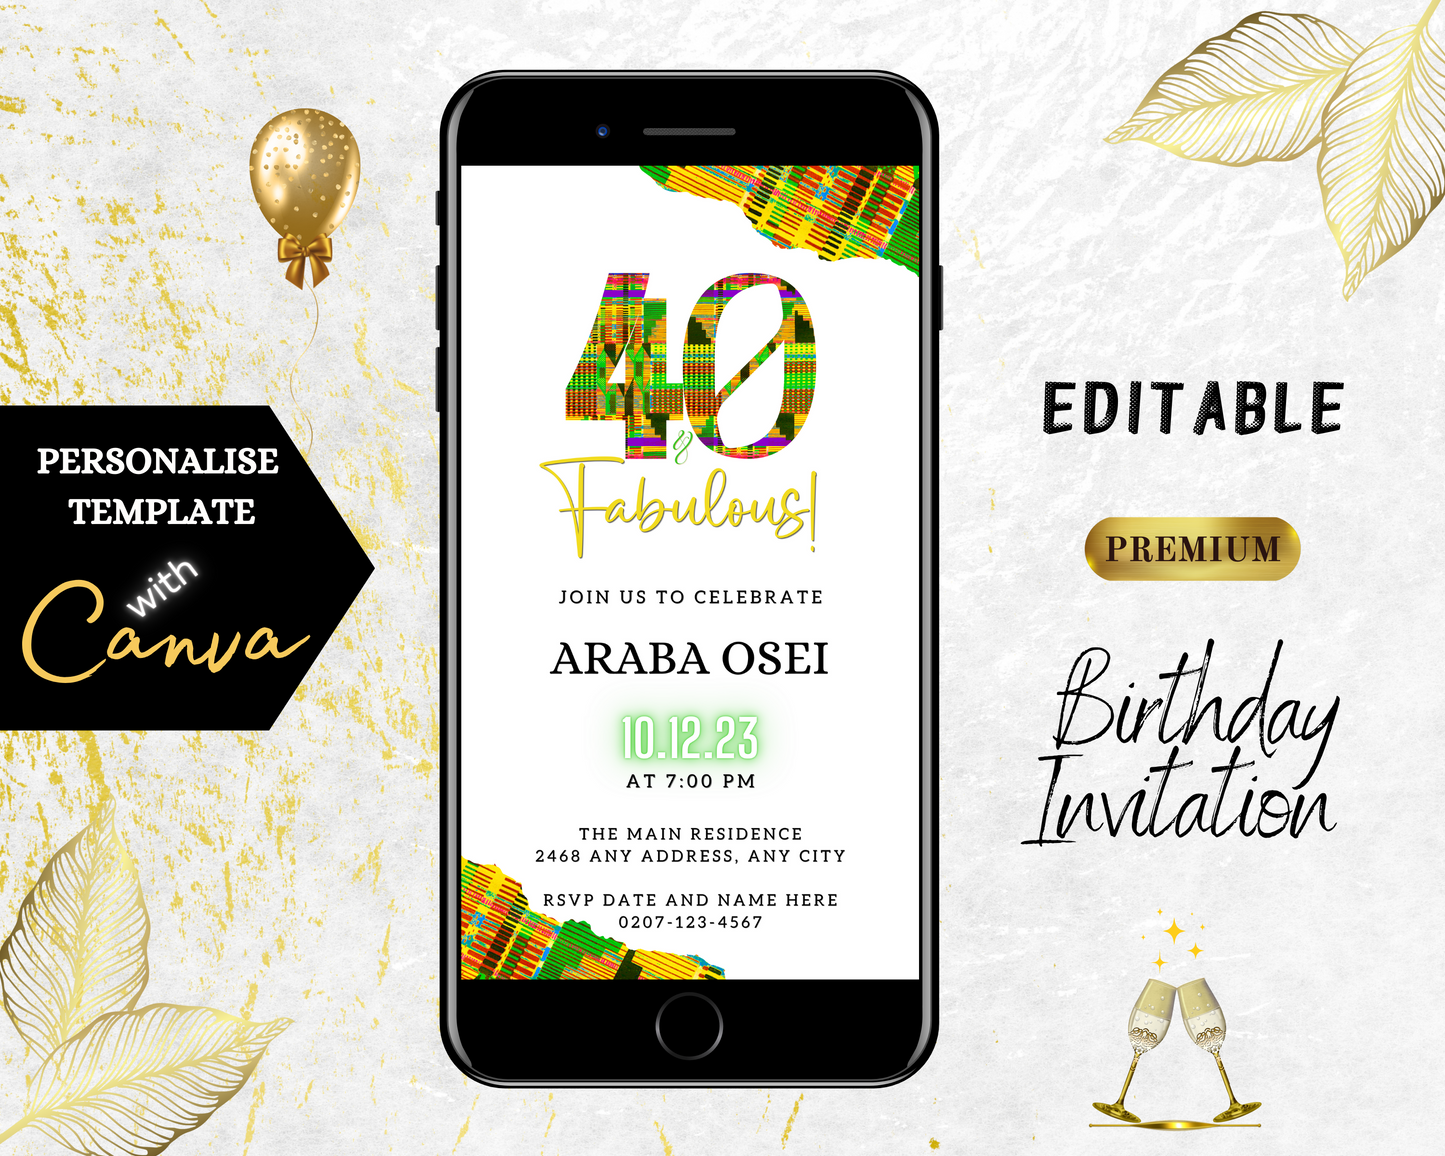 Cell phone displaying a White Green Yellow Kente | 40 & Fabulous Party Evite with editable text via Canva.